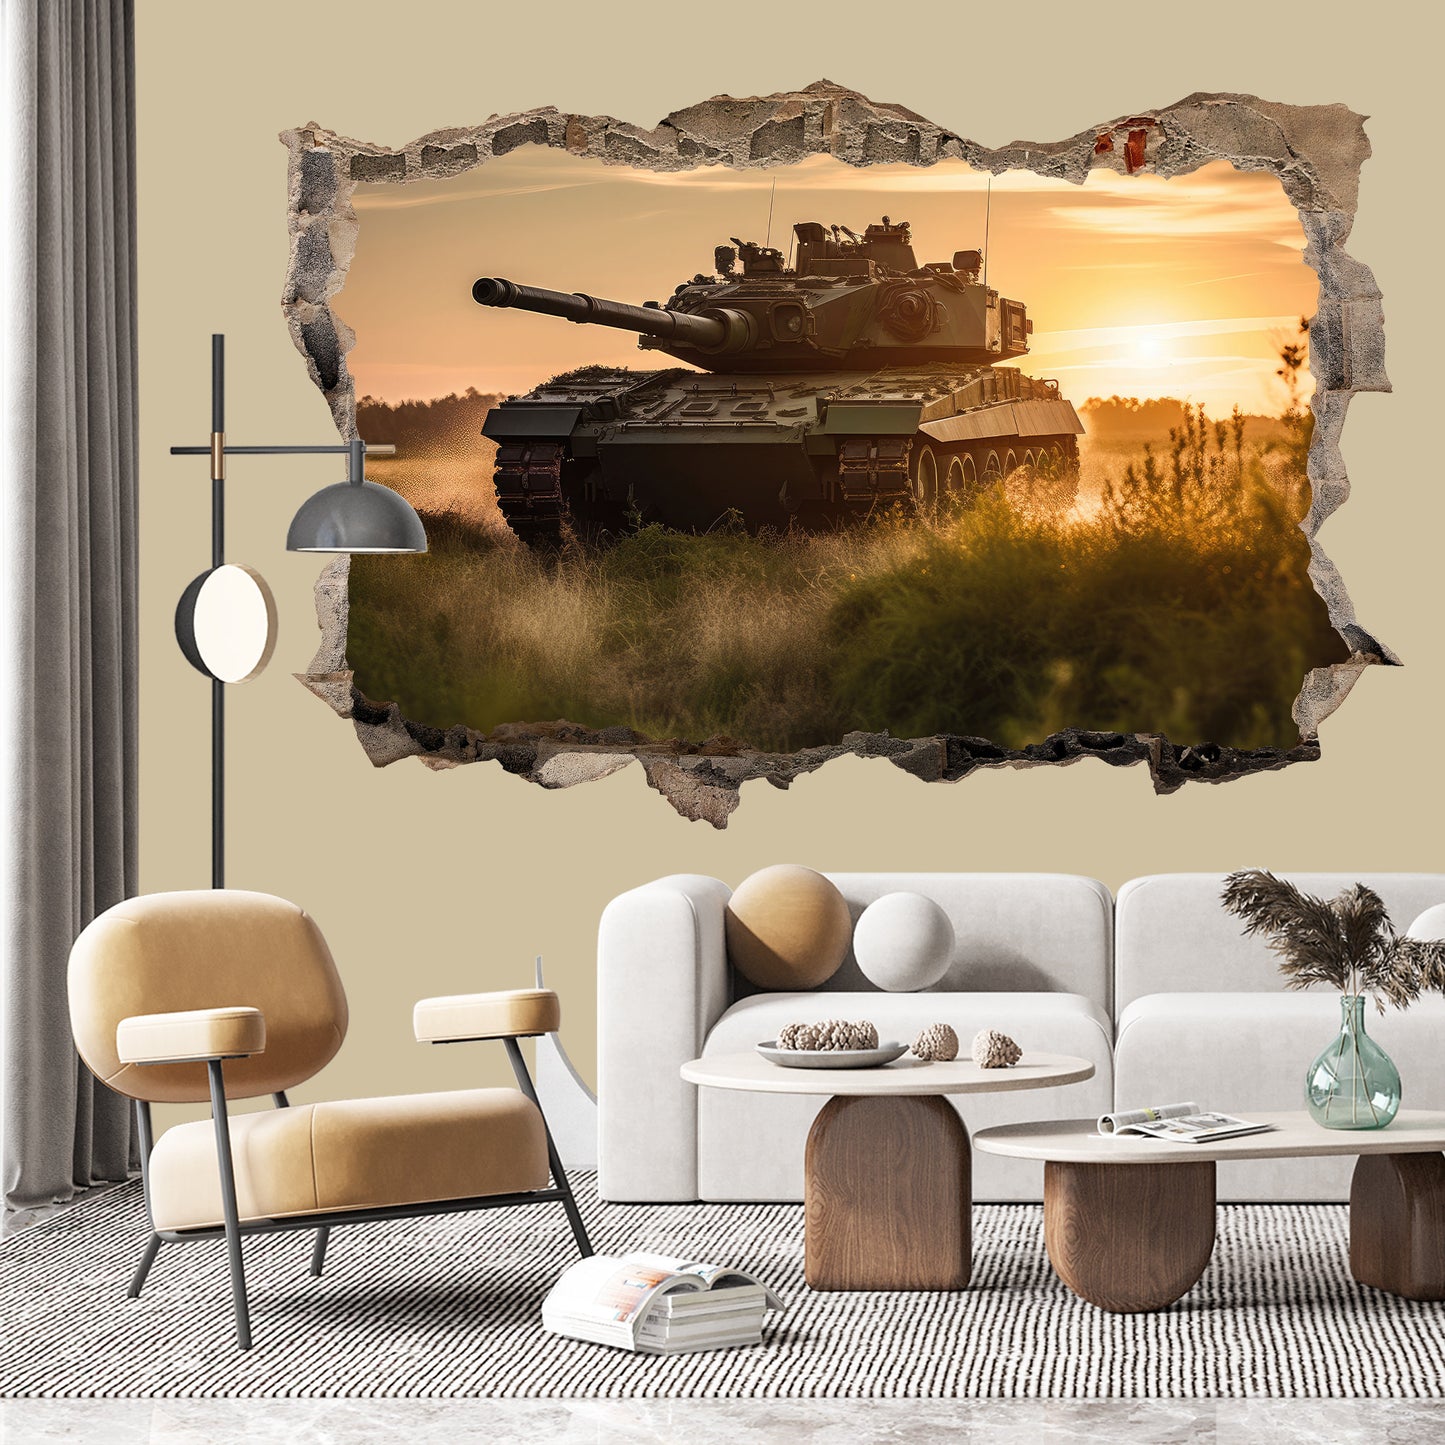 3D Tank Sunset Wall Decal - Tank Rolling on Meadow at Sunset, Room Decor - BW017